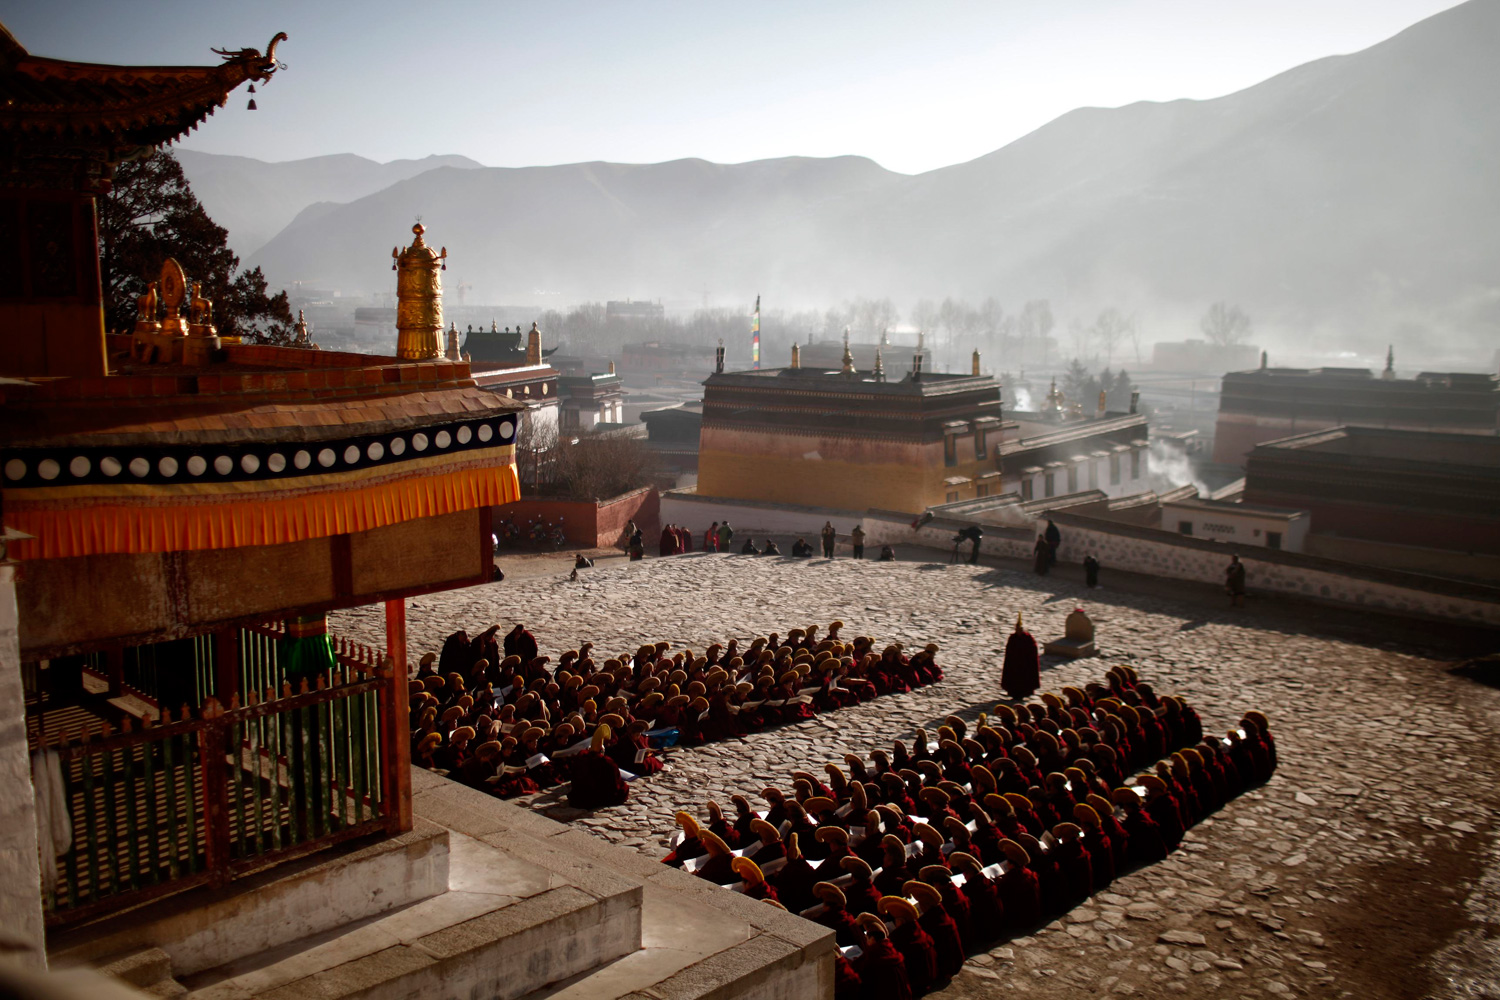 Feb. 21, 2012. Monks gather to pray at the Labrang monastery prior to Tibetan New Year in Xiahe county, Gansu Province, China.